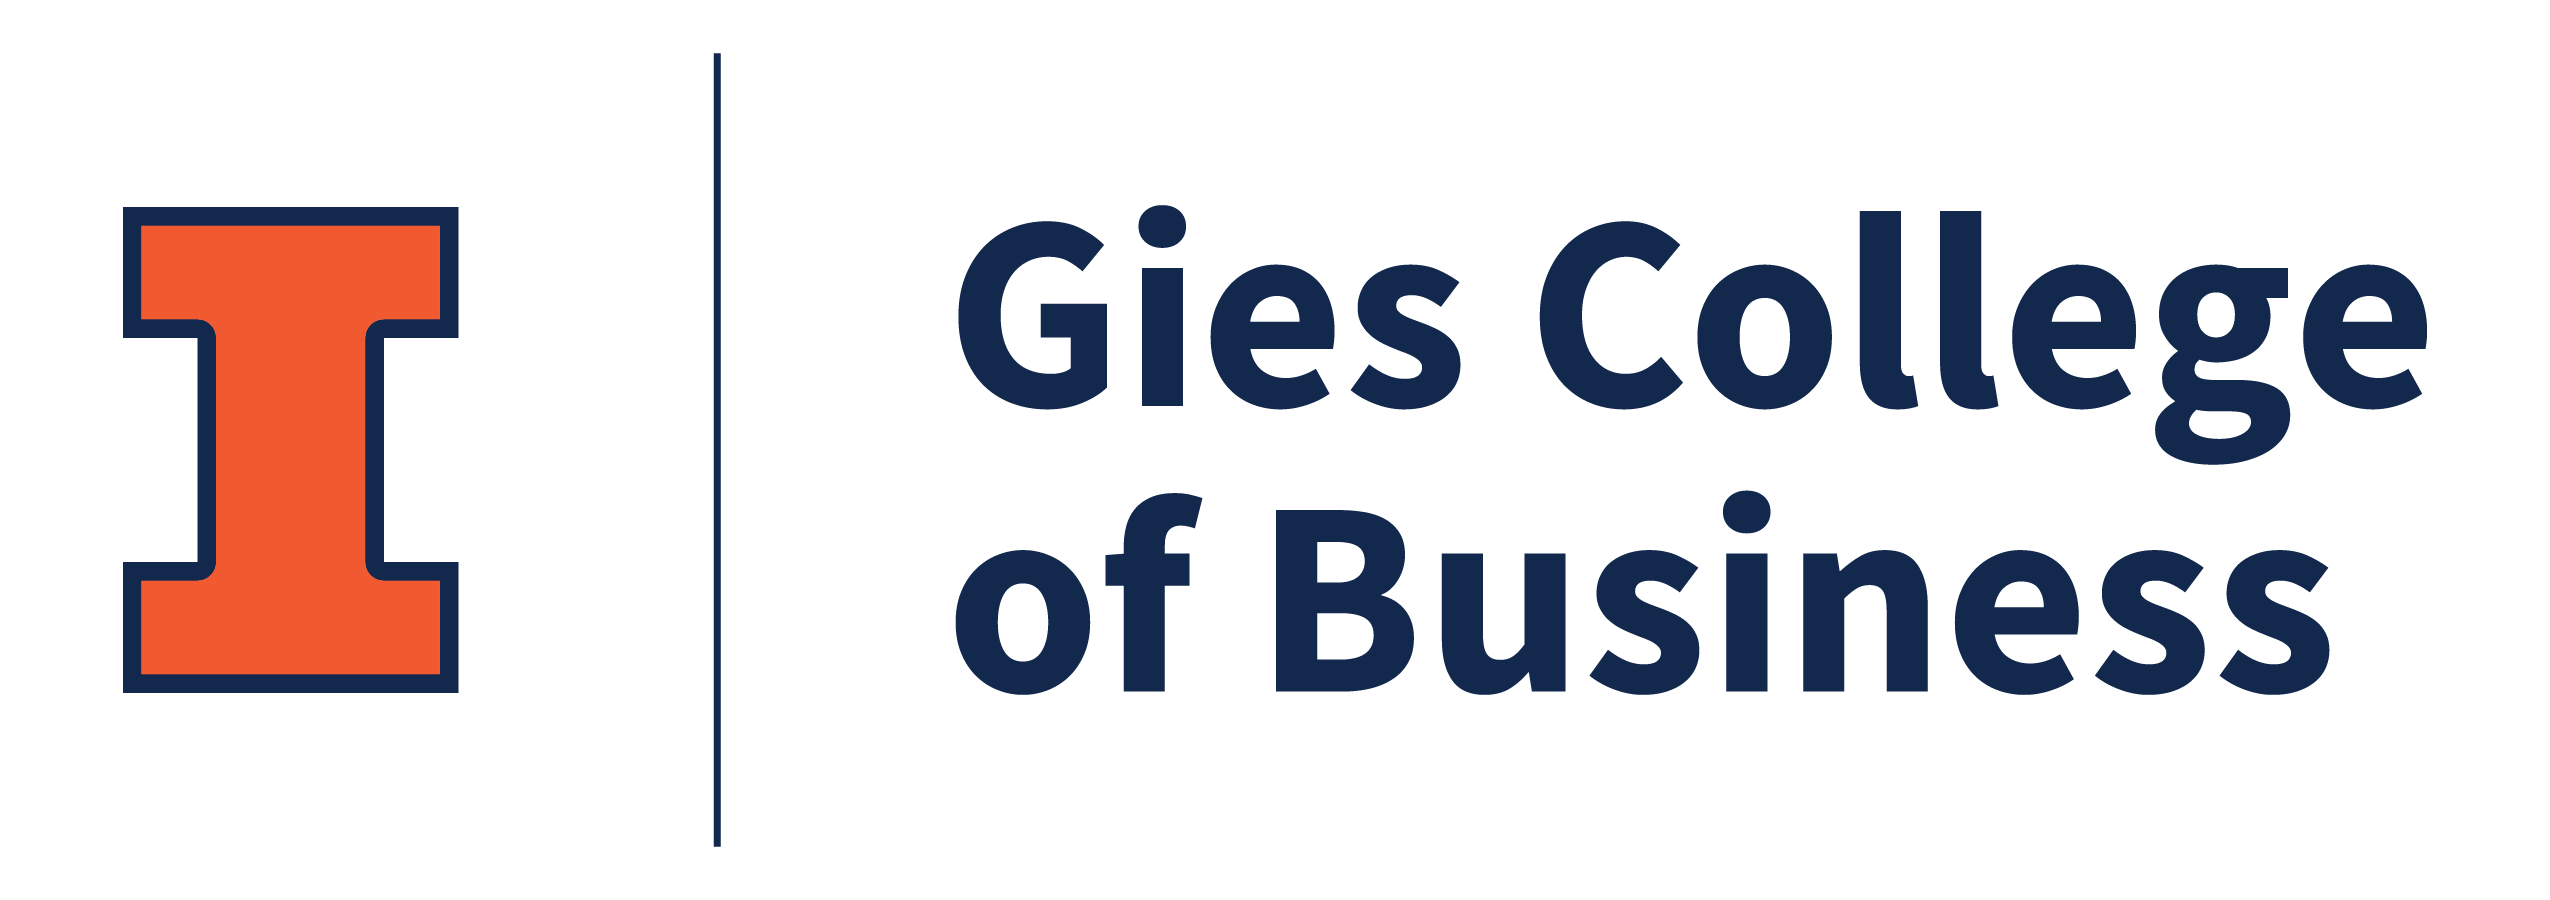 University of Illinois Gies College Of Business